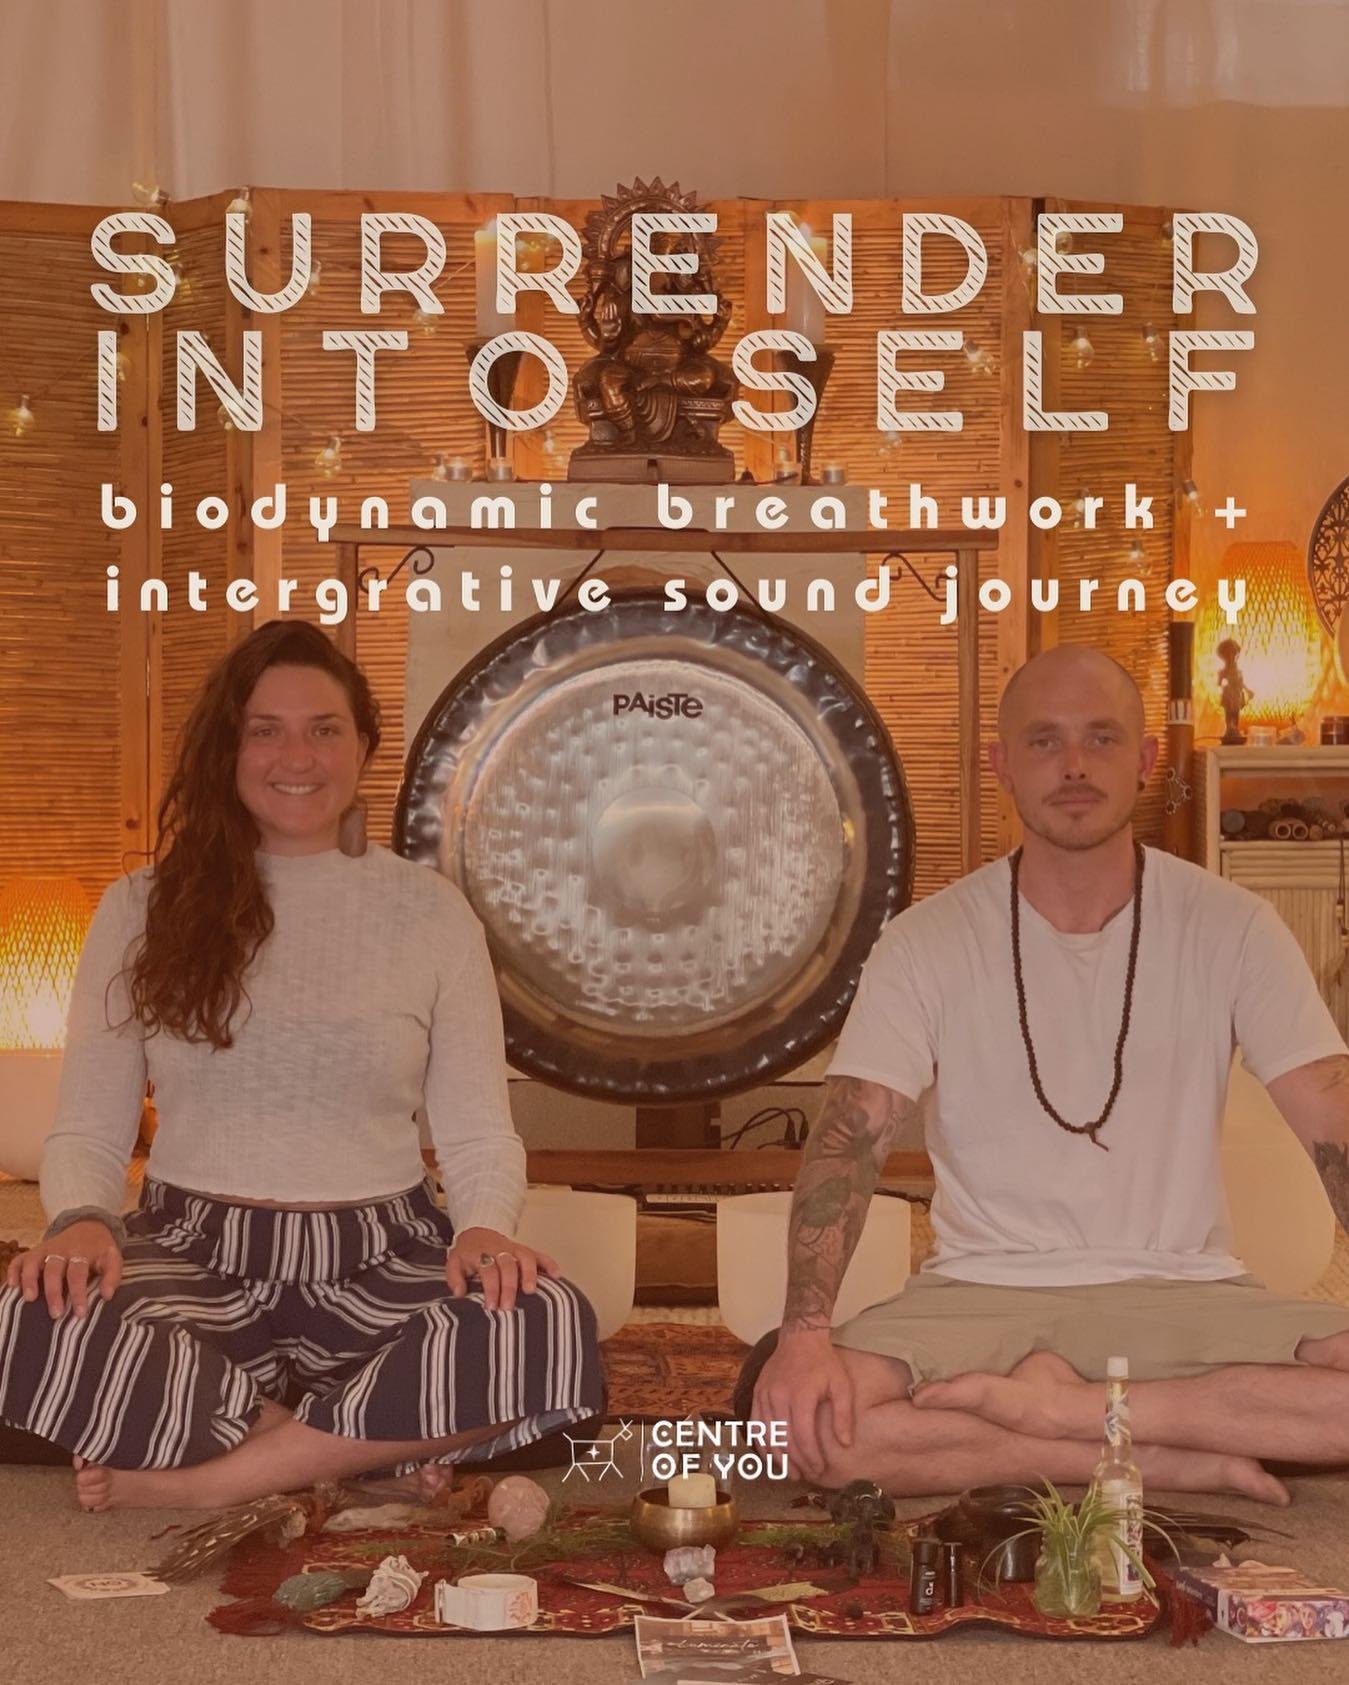 Highly recommend El &amp; Mike&rsquo;s Surrender Into Self workshop which I jumped into last month.

It&rsquo;s an educative, paced container for dropping into the inner-world through the tool of breathwork and opening to revelations that arise throu